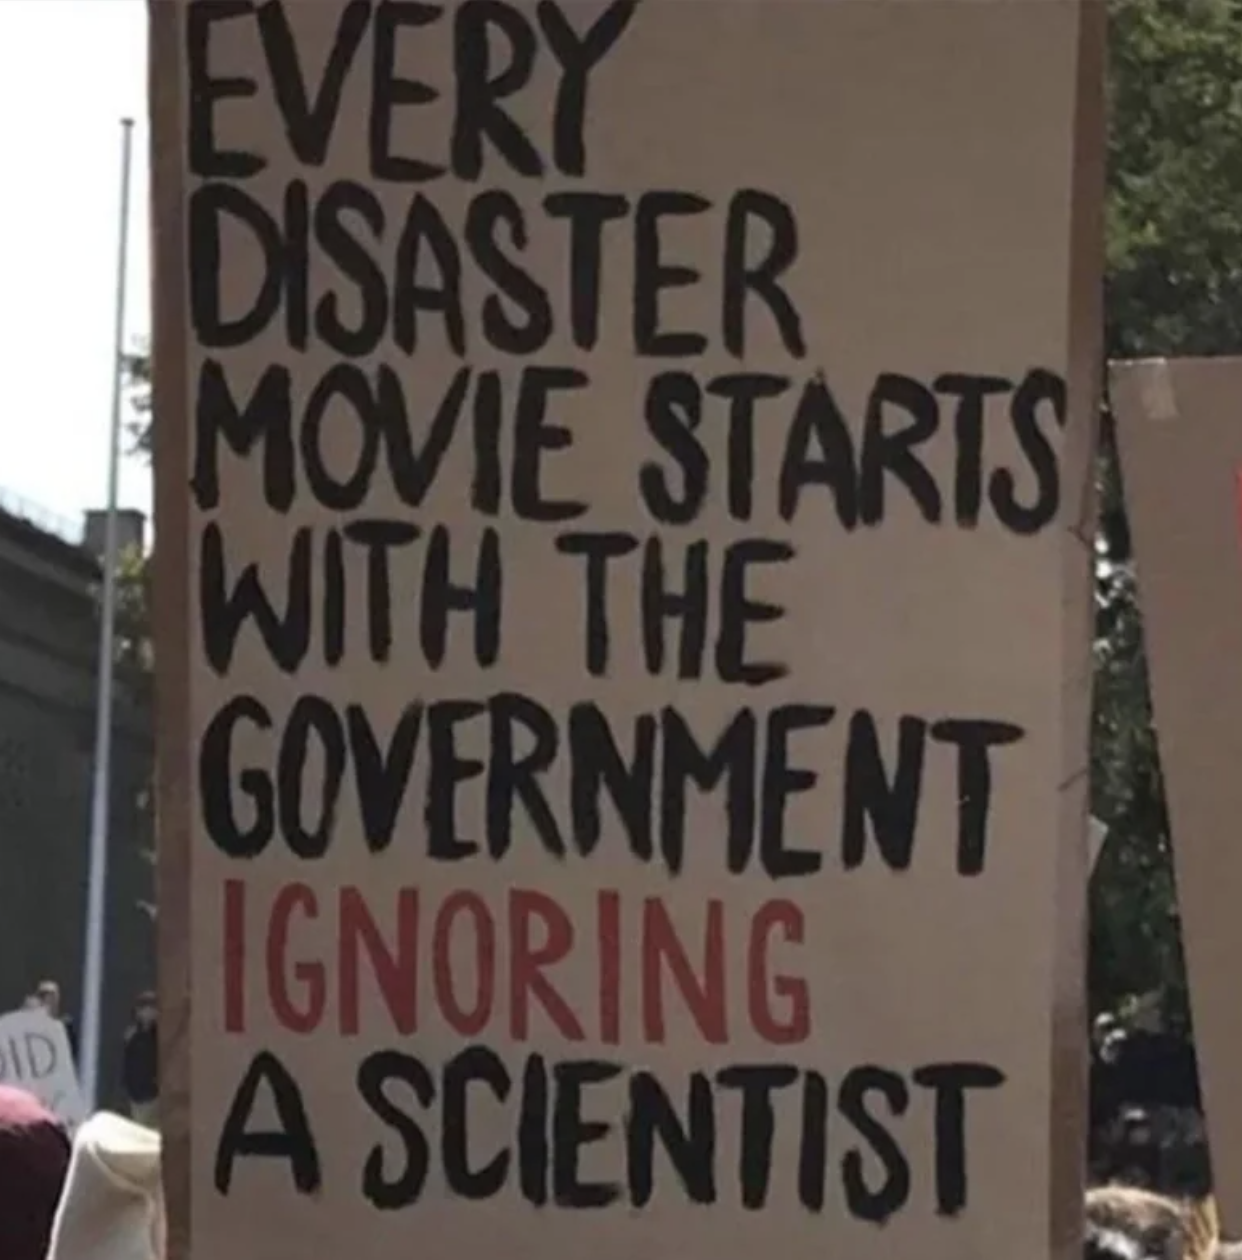 every disastor movie starts with the government ignoring a scientist